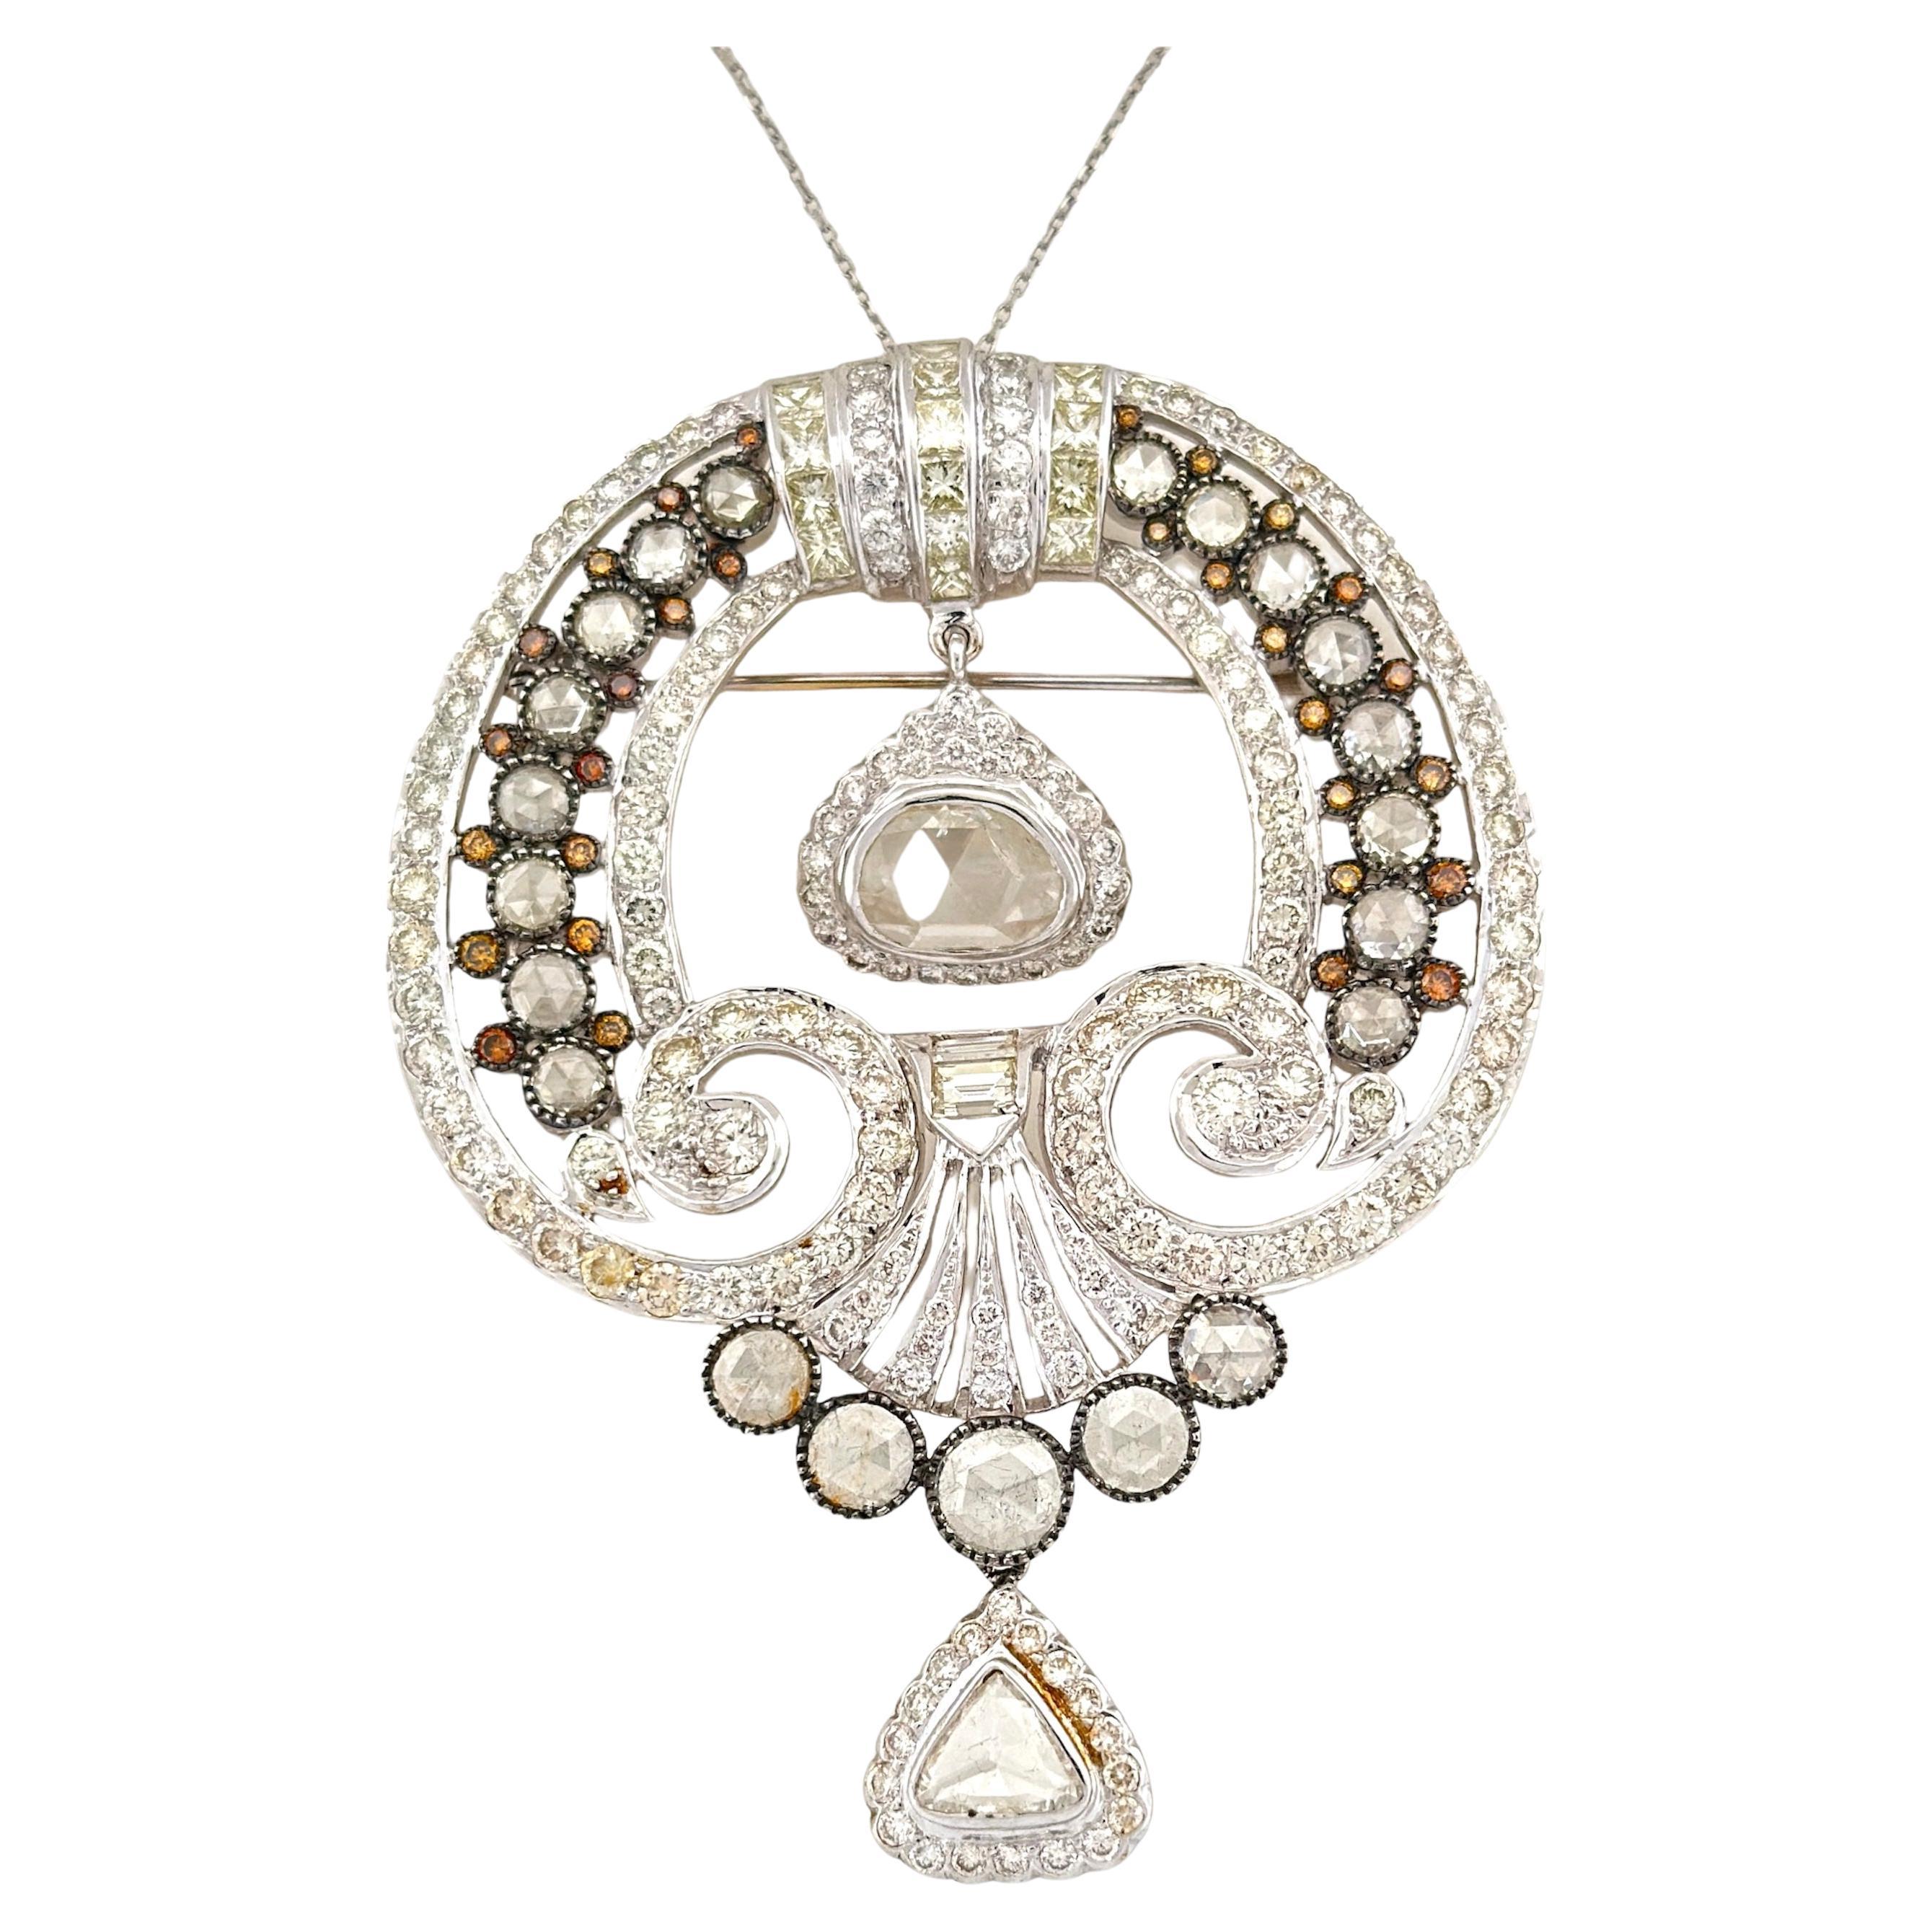 Dazzling Art Deco Pendant: Showcasing Hanging Rose Cuts and White Diamonds For Sale